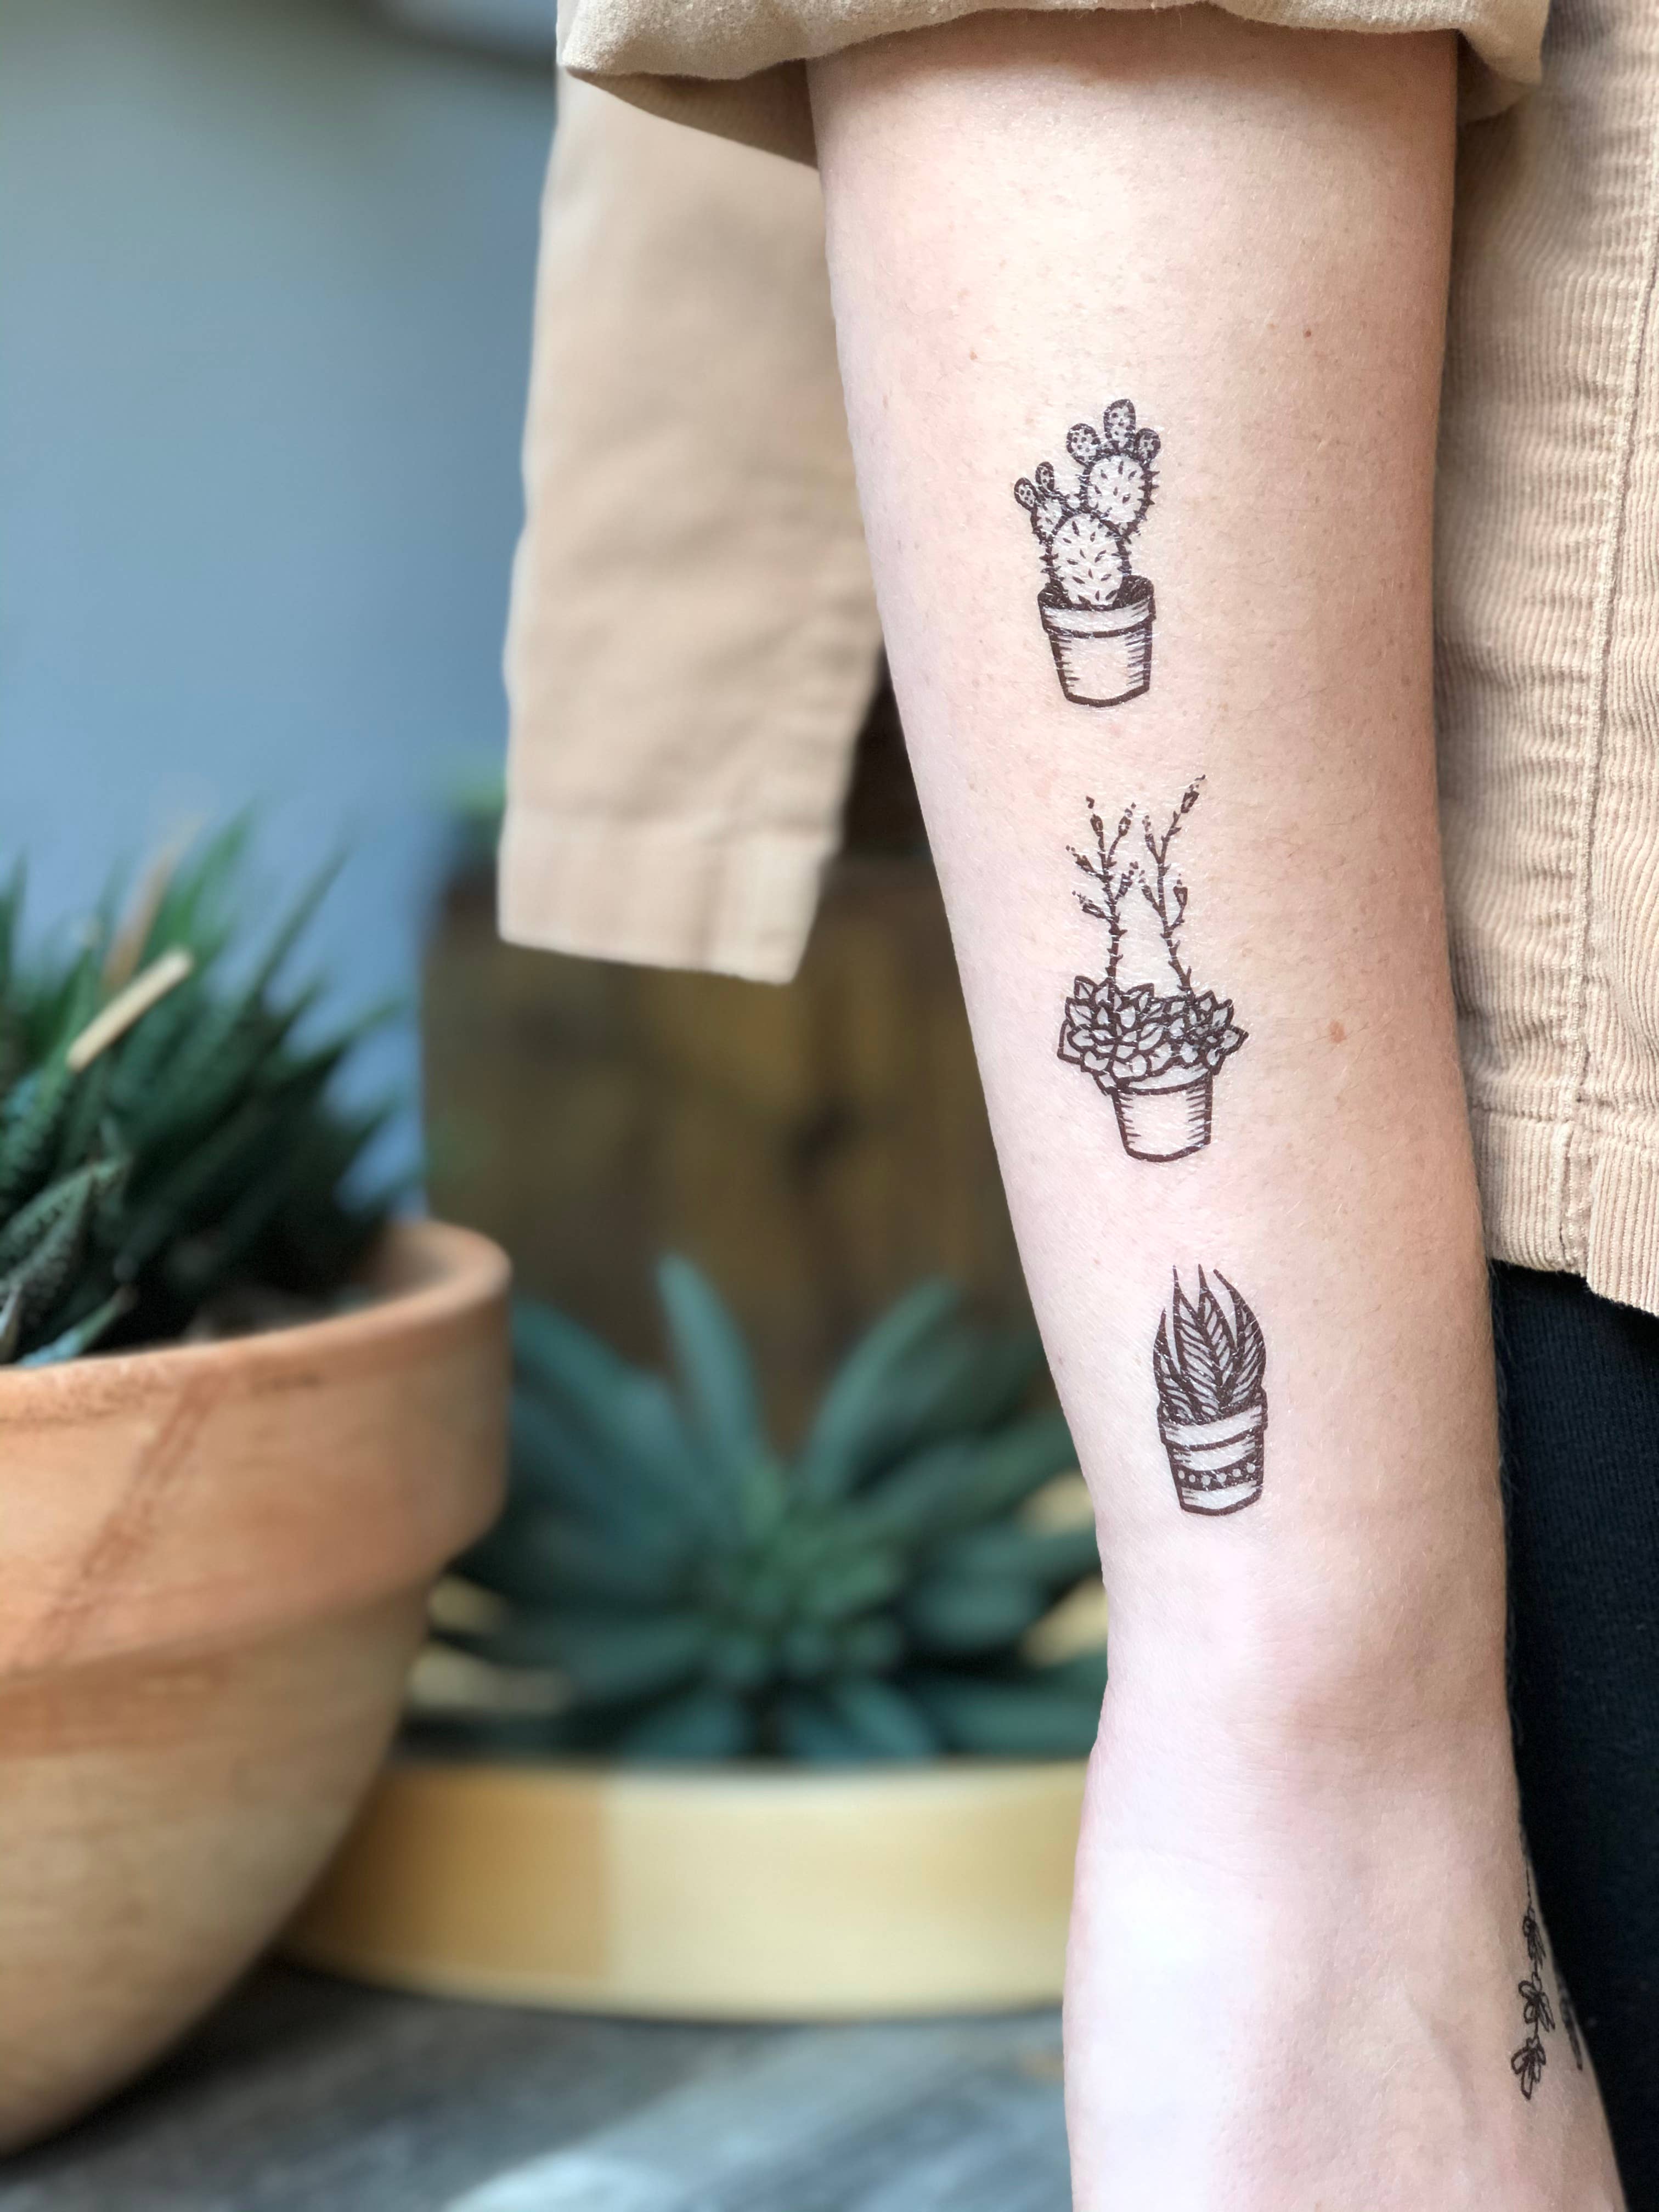 Team Cacti Semi-Permanent Tattoo. Lasts 1-2 weeks. Painless and easy to  apply. Organic ink. Browse more or create your own. | Inkbox™ |  Semi-Permanent Tattoos